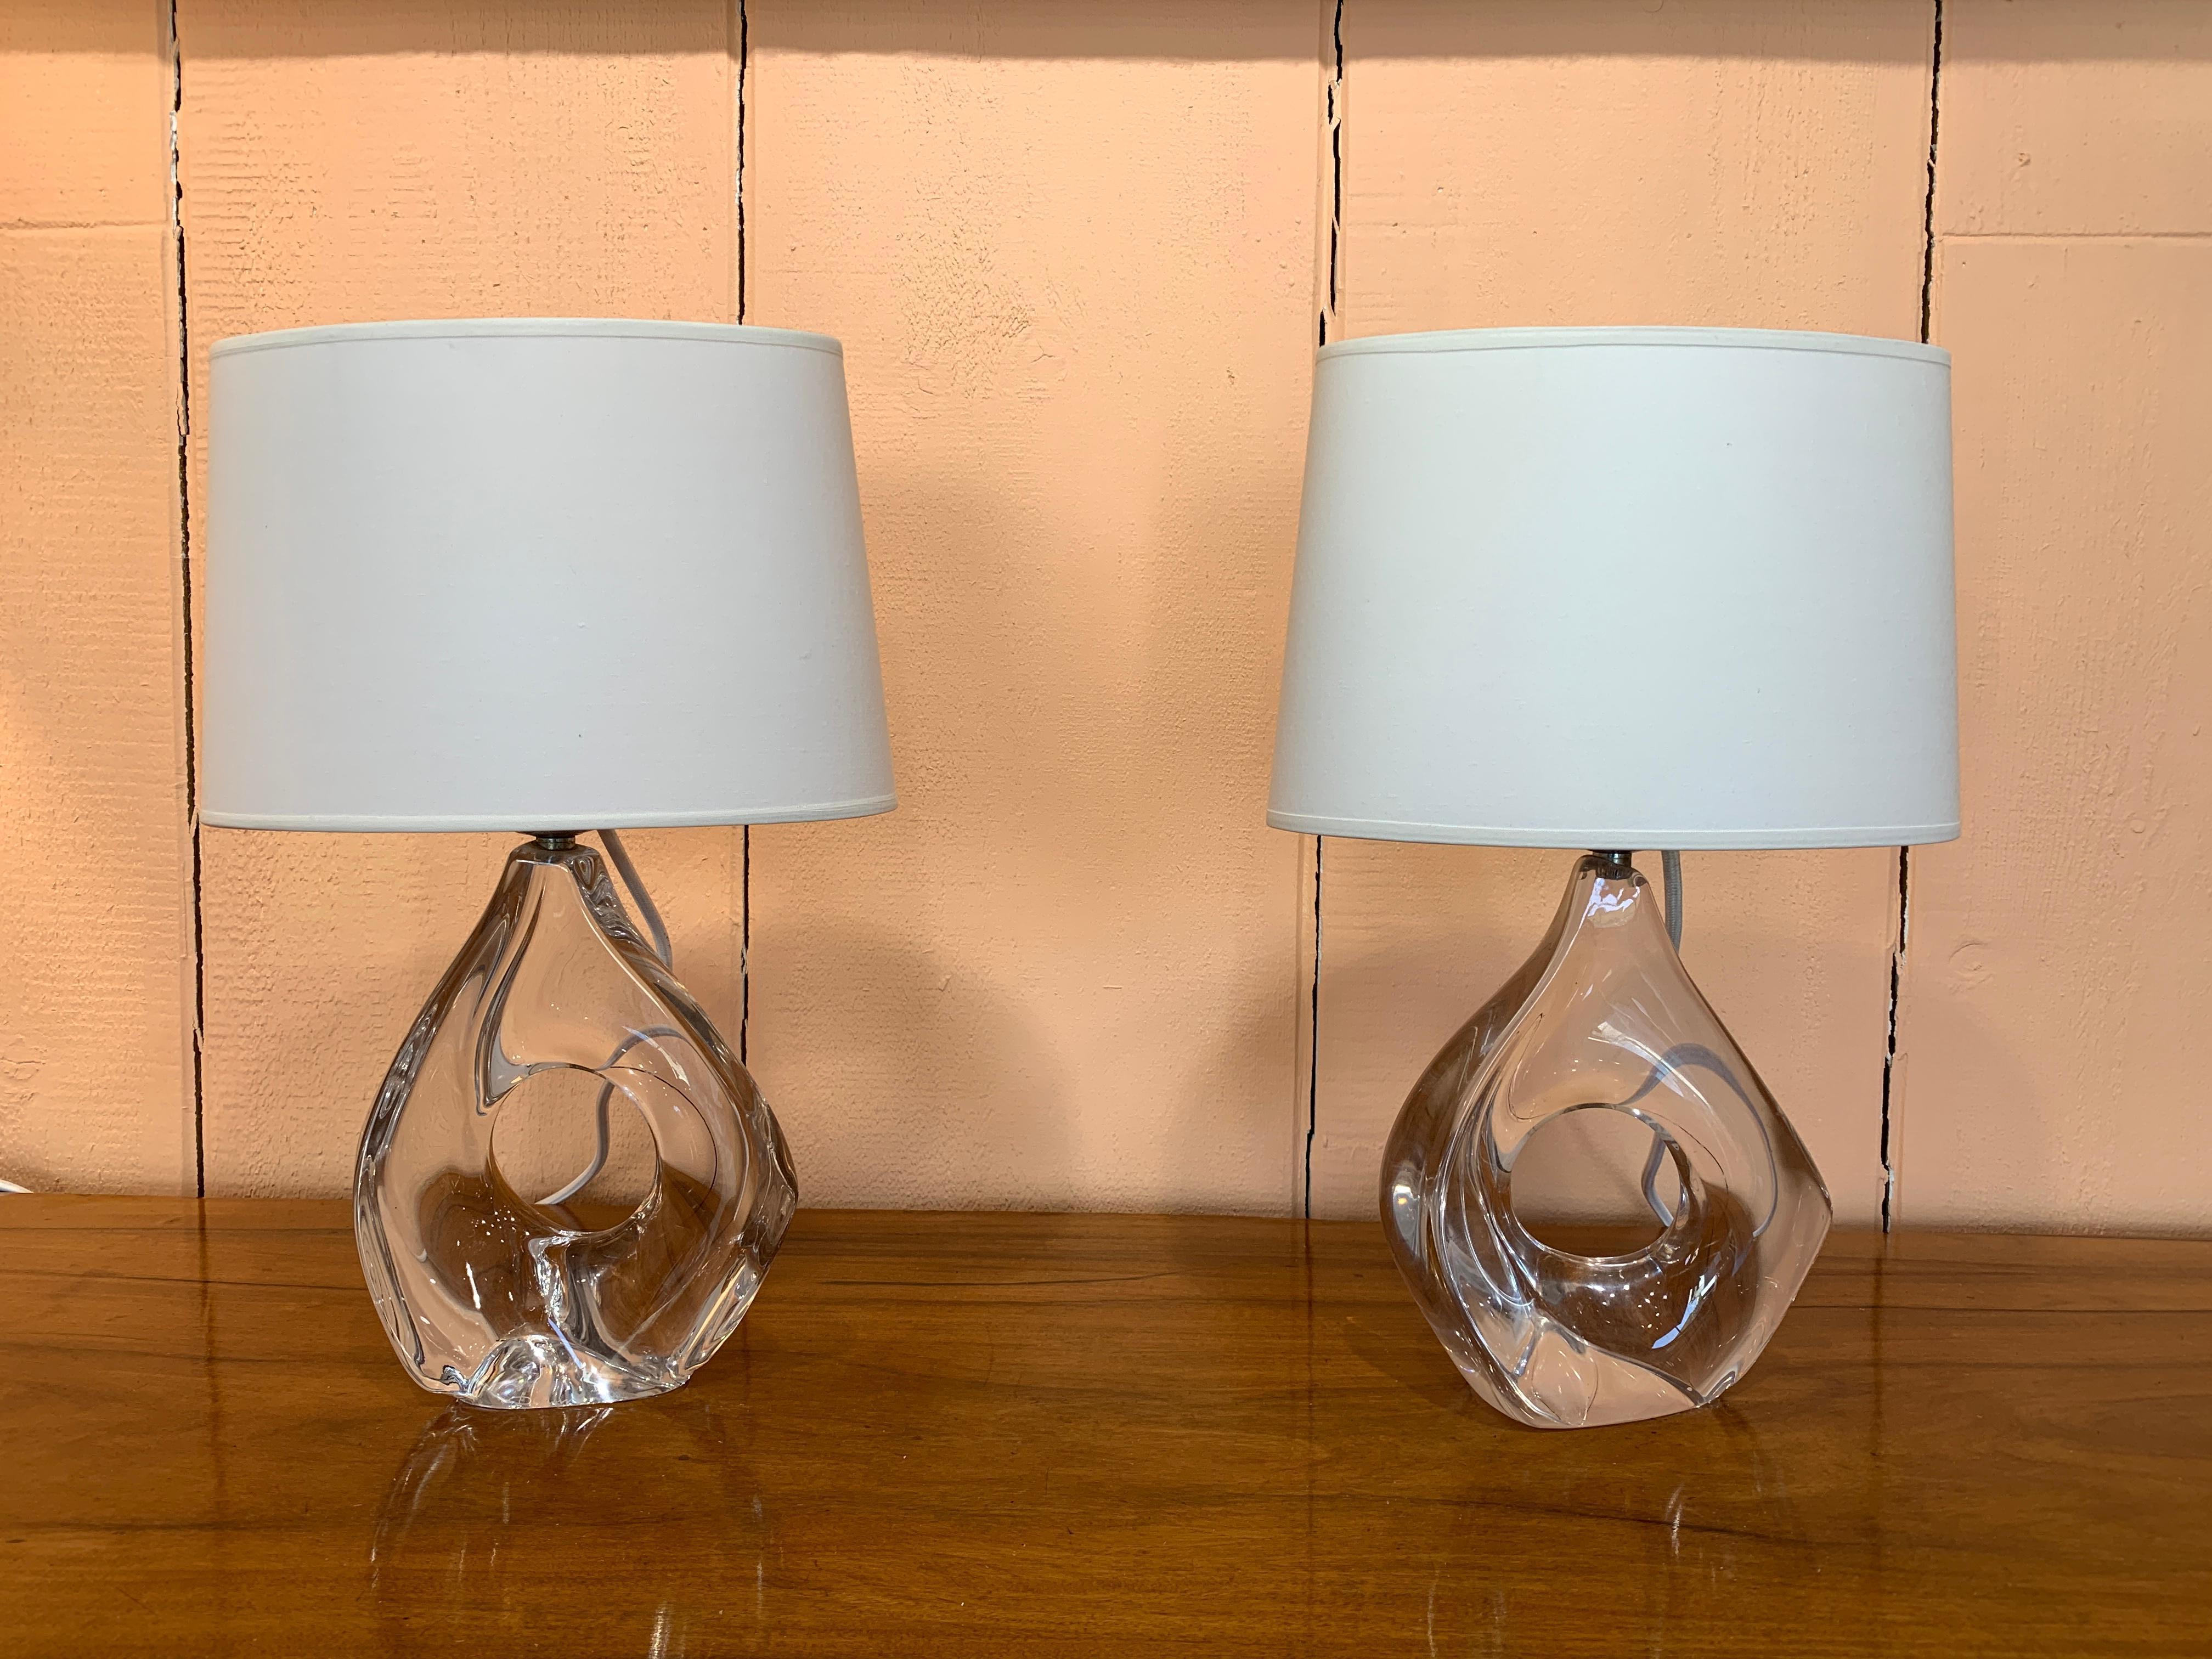 Pair of translucent crystal luminaires and cotton shade, signed Daum on the base. France, c. 1950. 
Shades and lampshades
Electrification system have been changed. In perfect working condition.